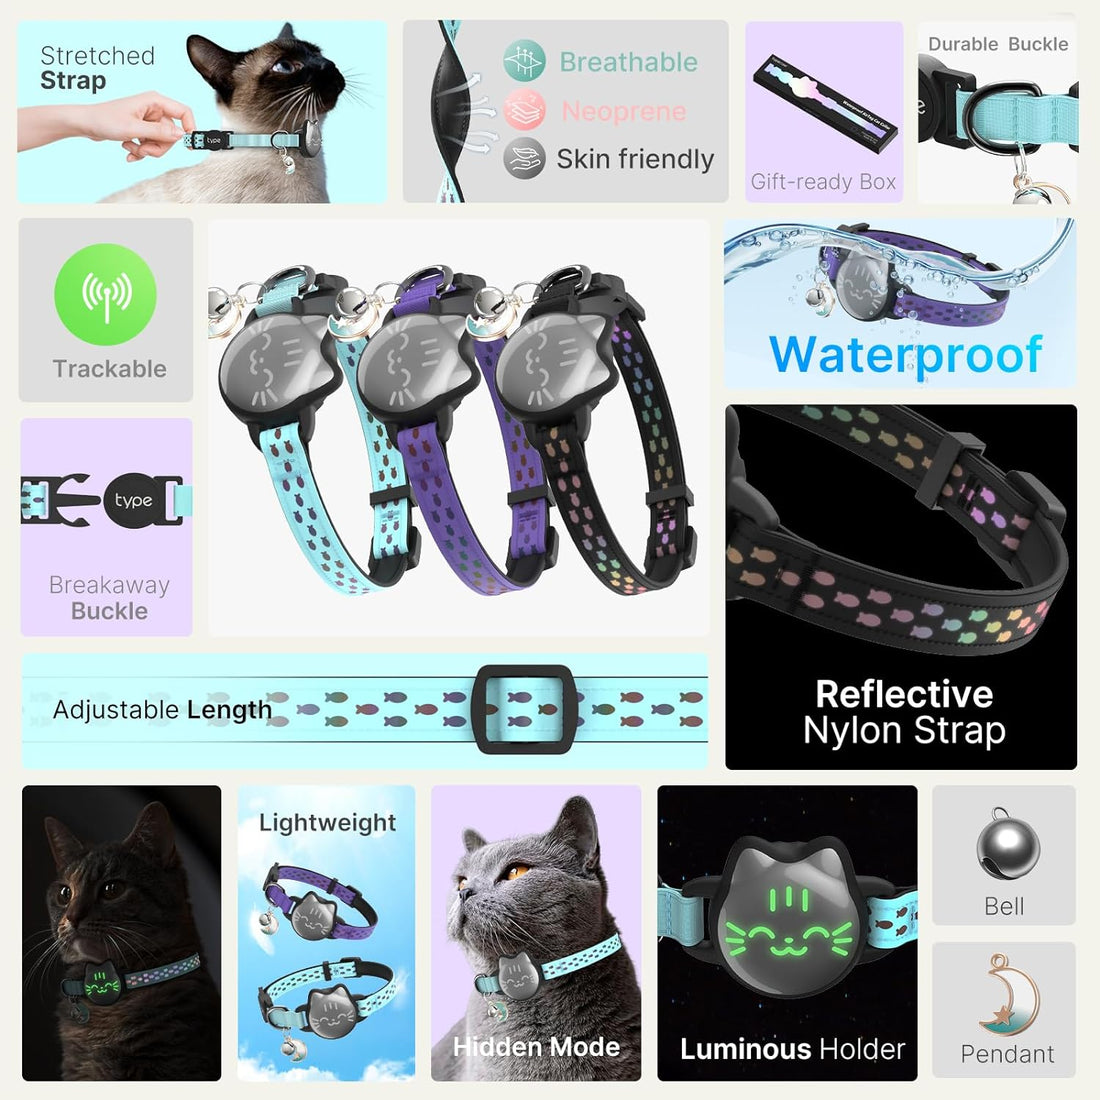 Waterproof Airtag Cat Collar, Breakaway Cat Airtag Collar with Luminous & Reflective Fish Pattern, Lightweight Kitten Collar for Apple Air tag, Hidden GPS Tracker for Cats, Kittens, Puppies (7-9")